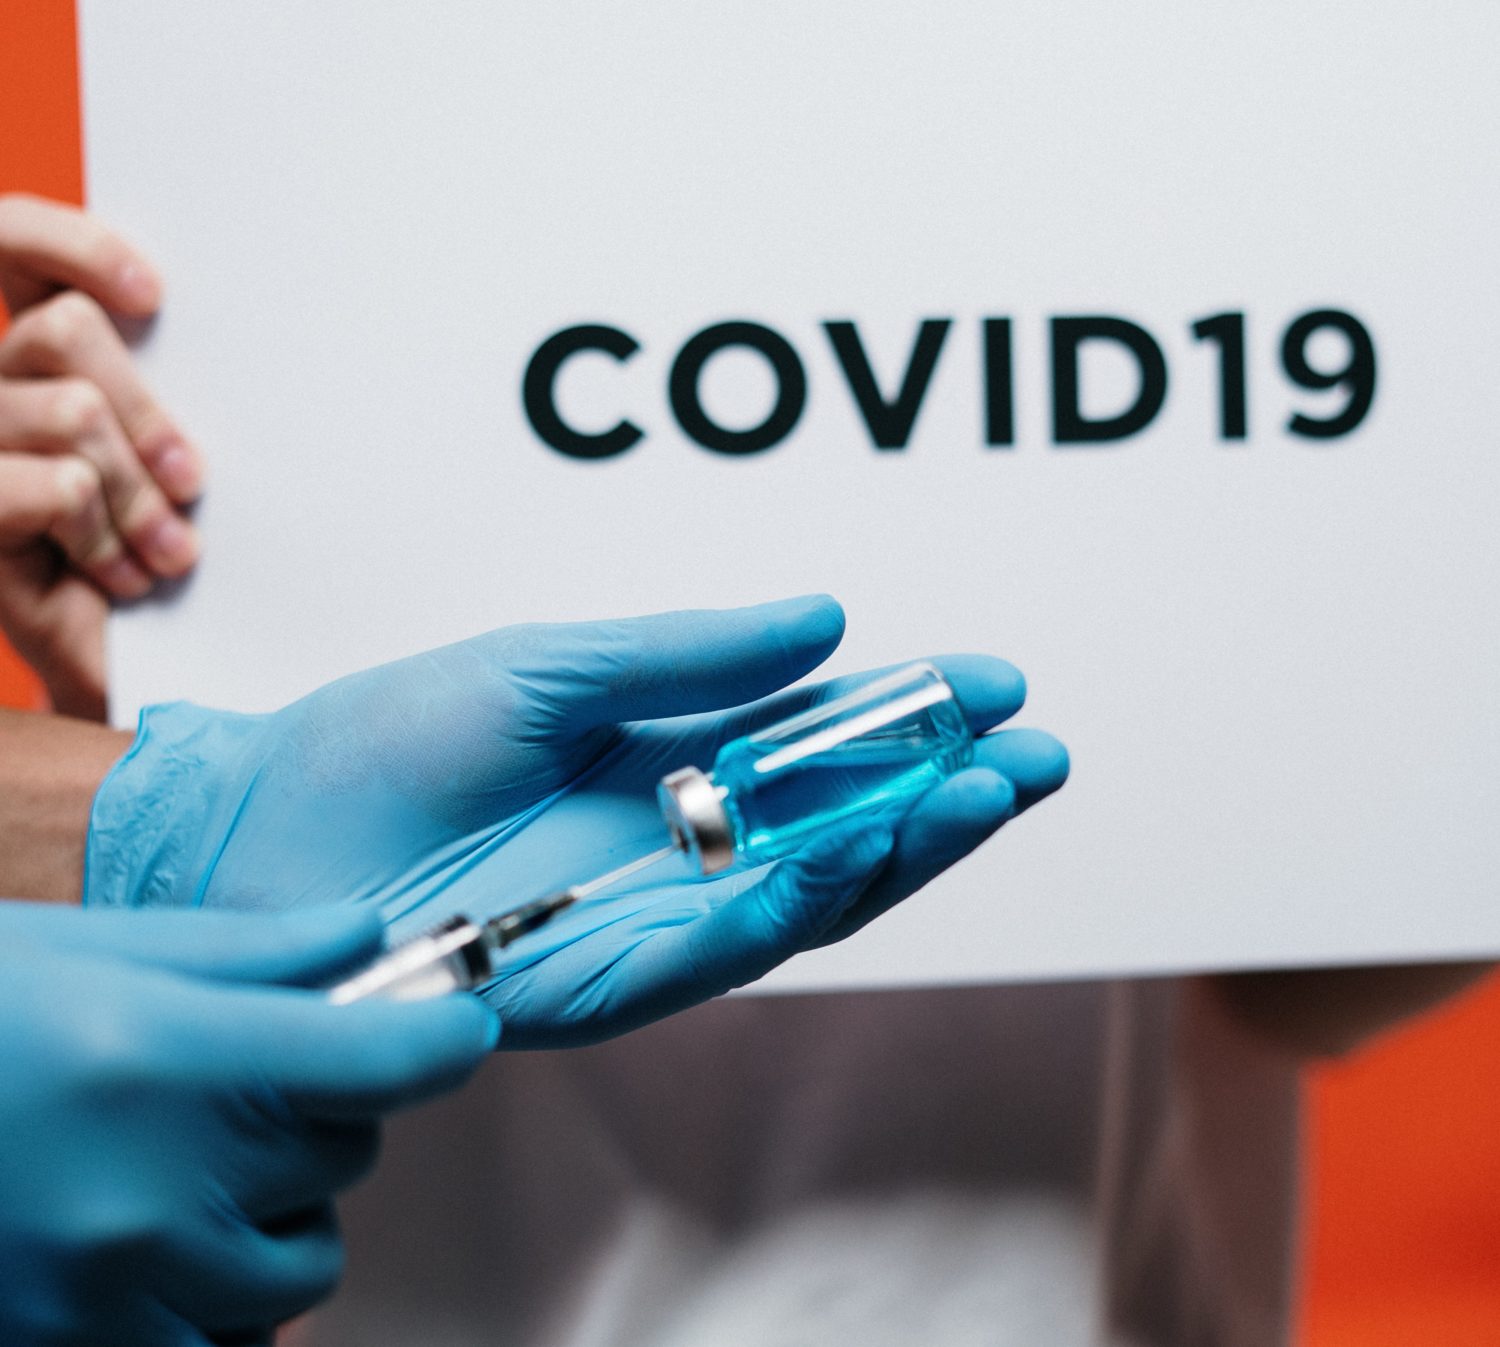 16 COVID-19 Predictions and Trends for 2021 Executive Roundup 12-Available-COVID-19-Vaccine-Management-Solutions-to-Know-In-Depth-1